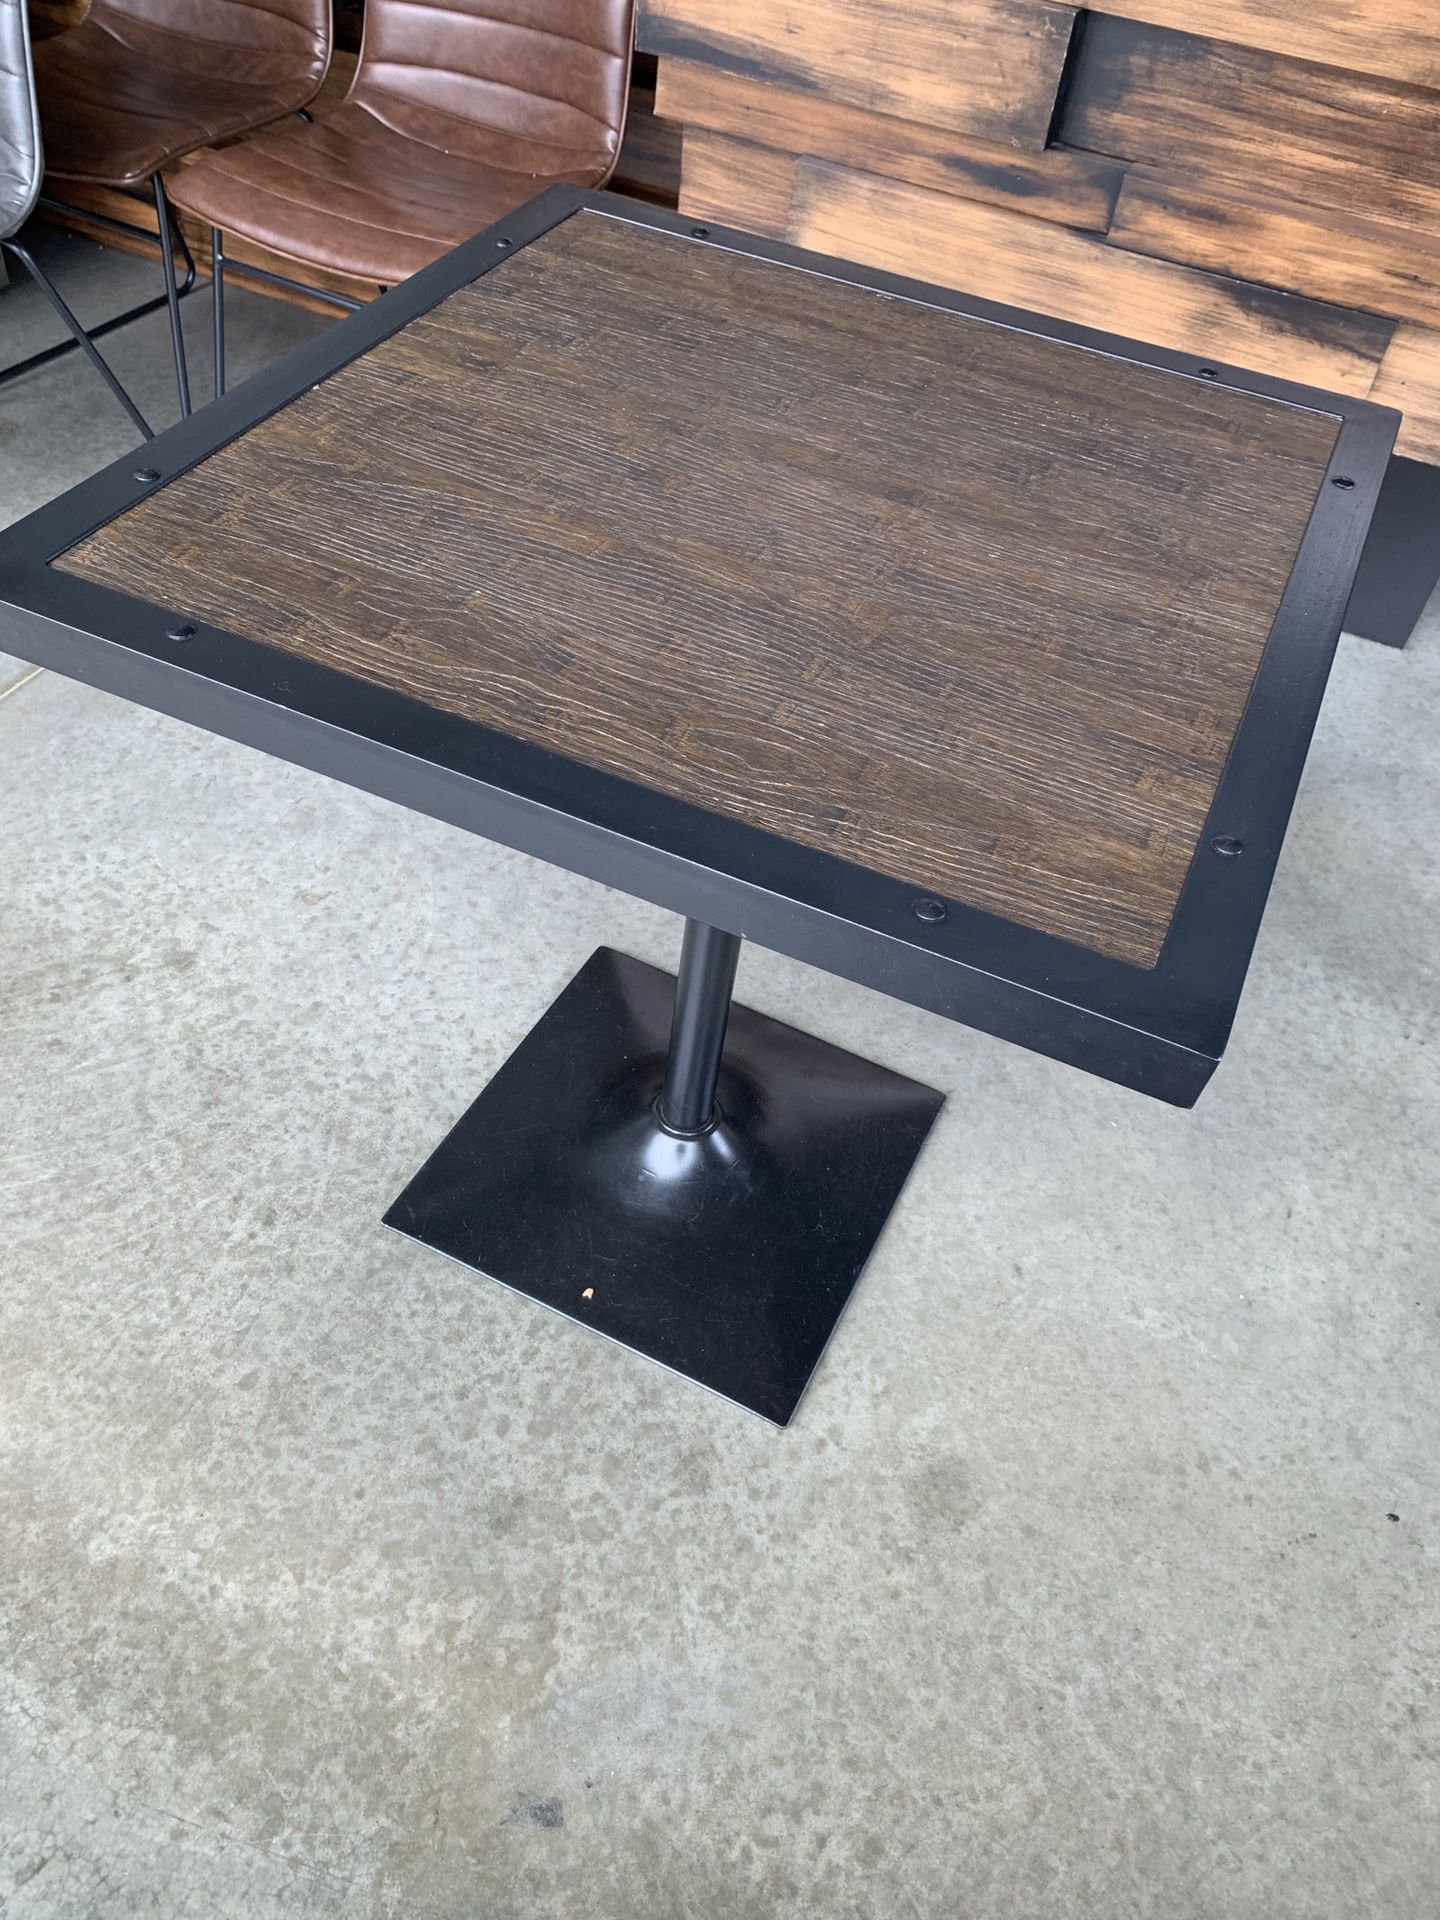 Wooden table with metal frame